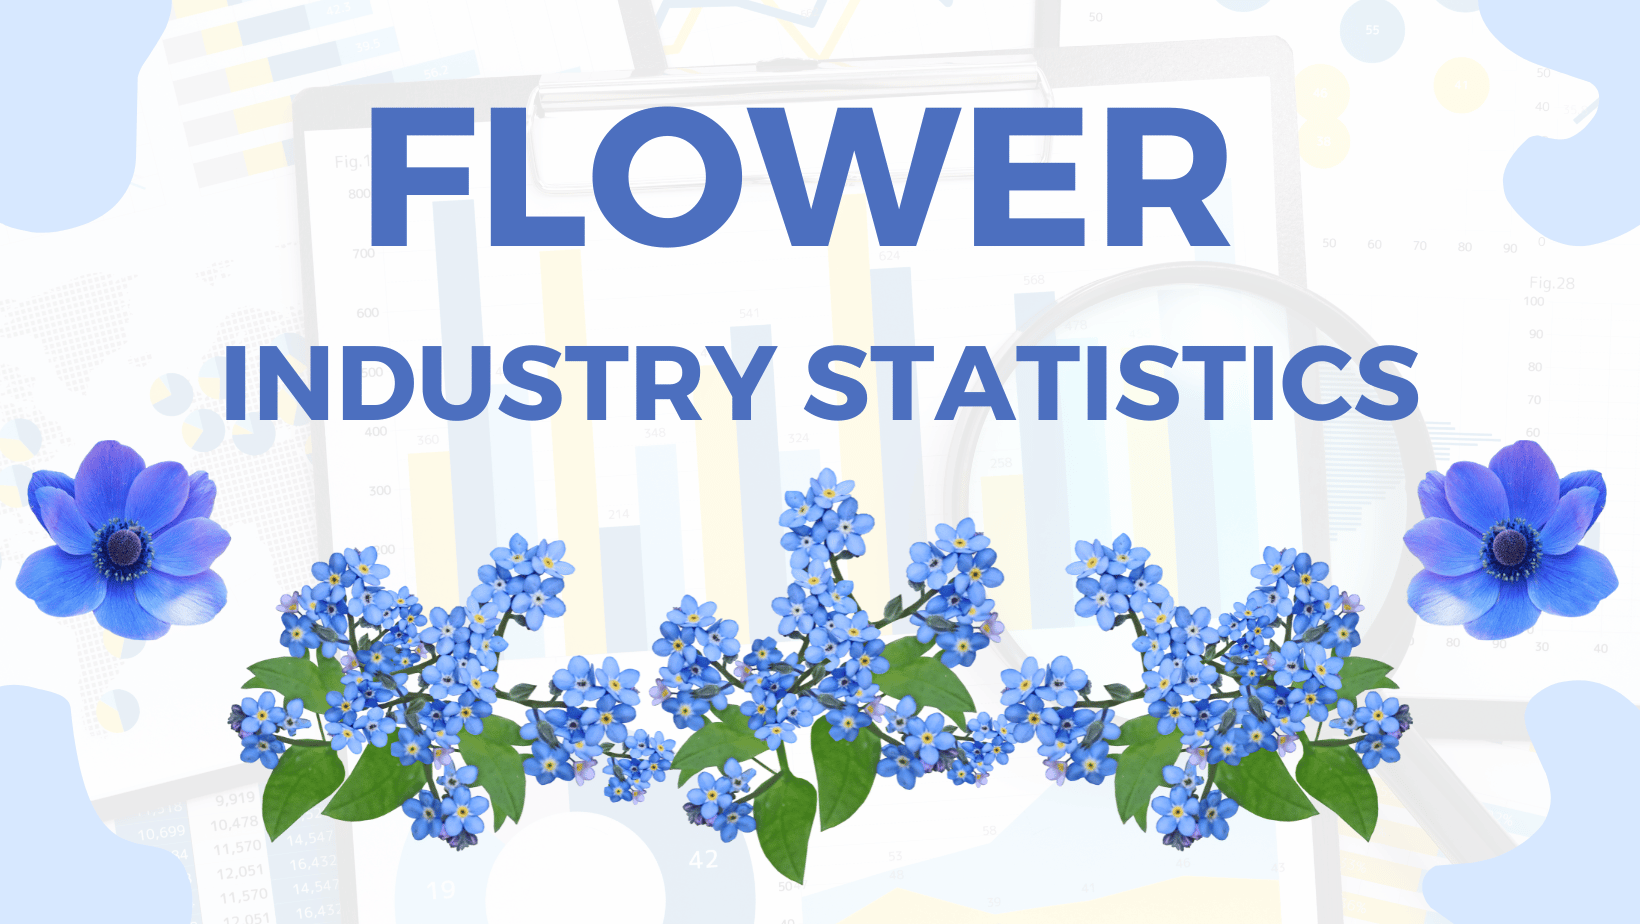 Flower Industry Statistics: Market size, floral sales, trends, occasions, trends, companies and countries.